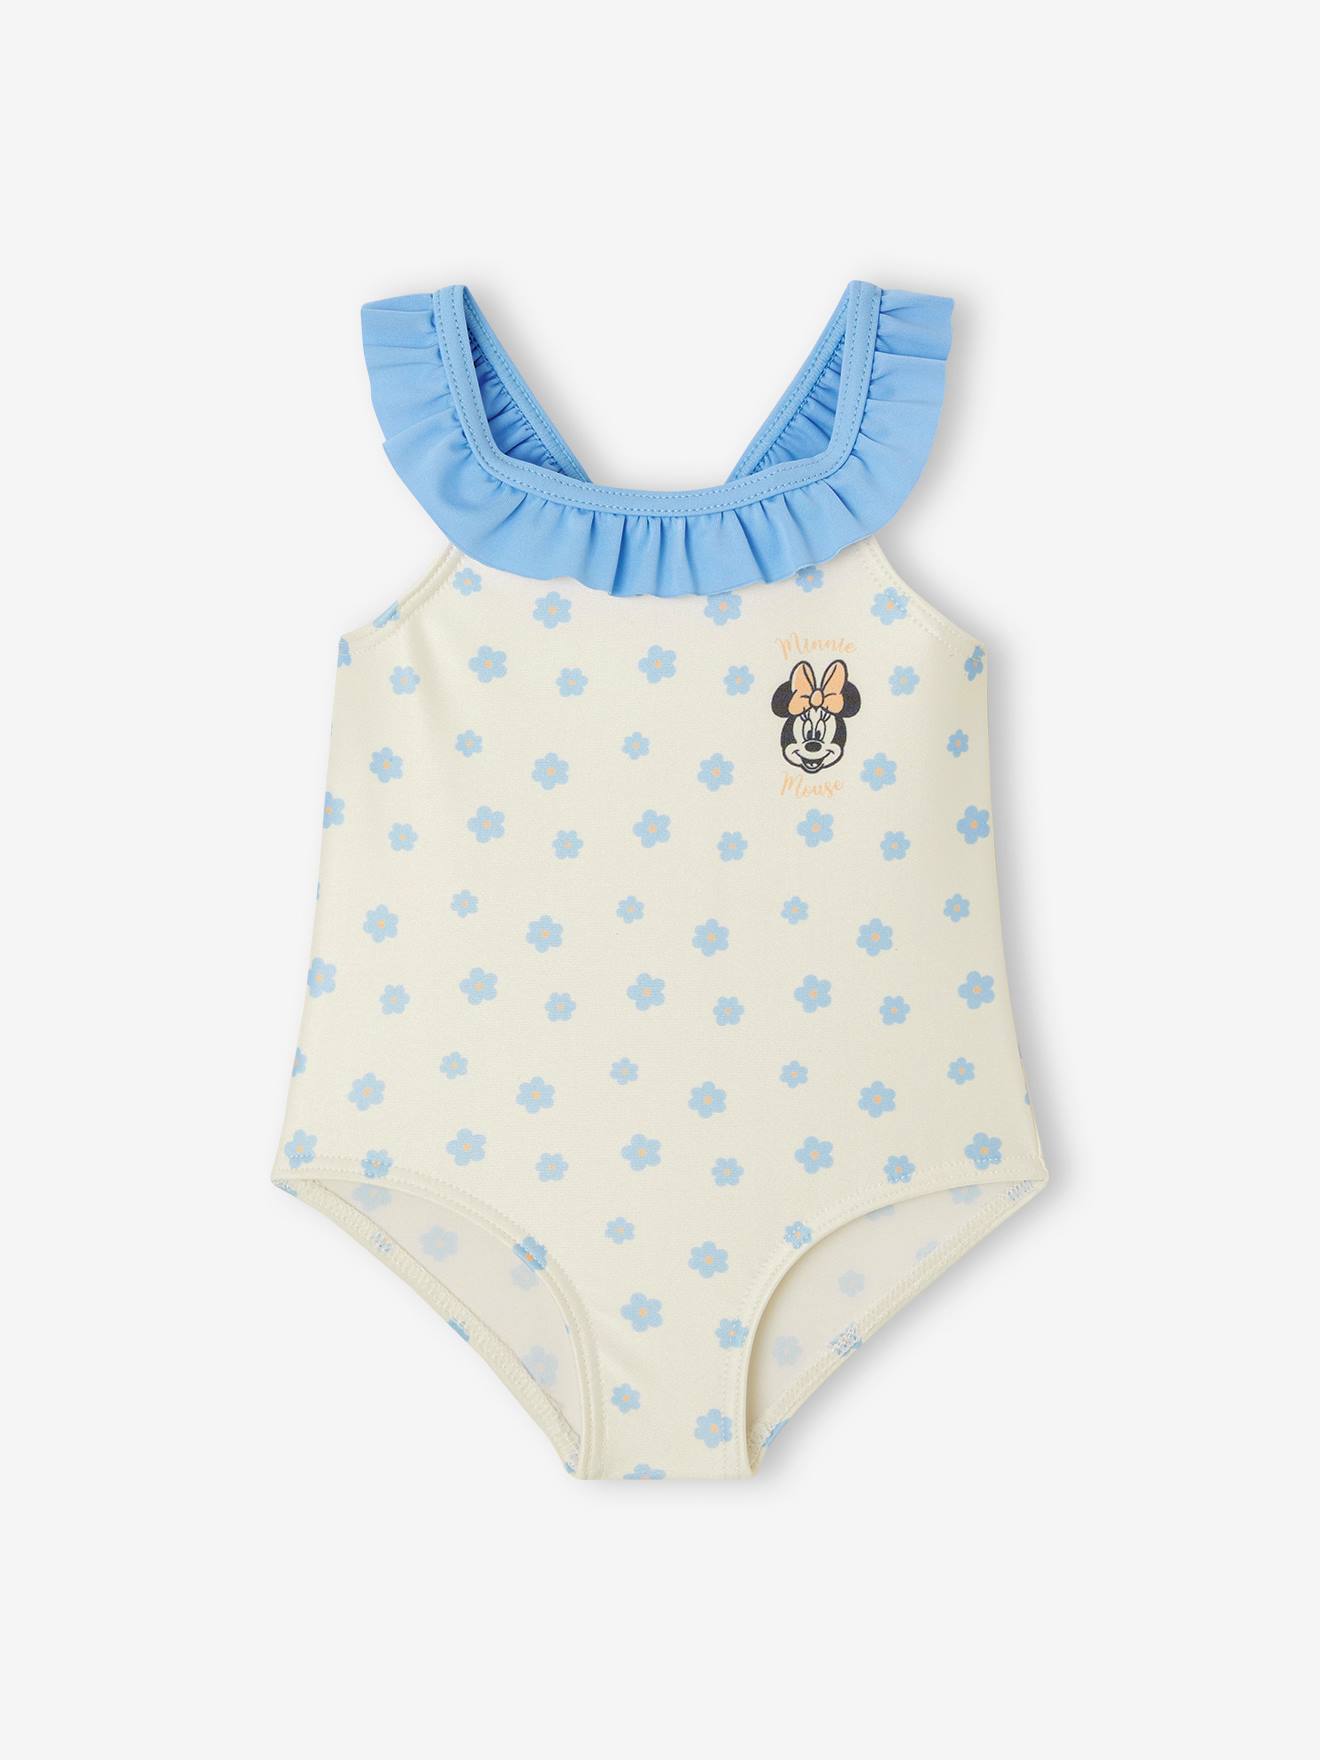 Minnie Mouse Swimsuit by Disney(r) for Baby Girls blue